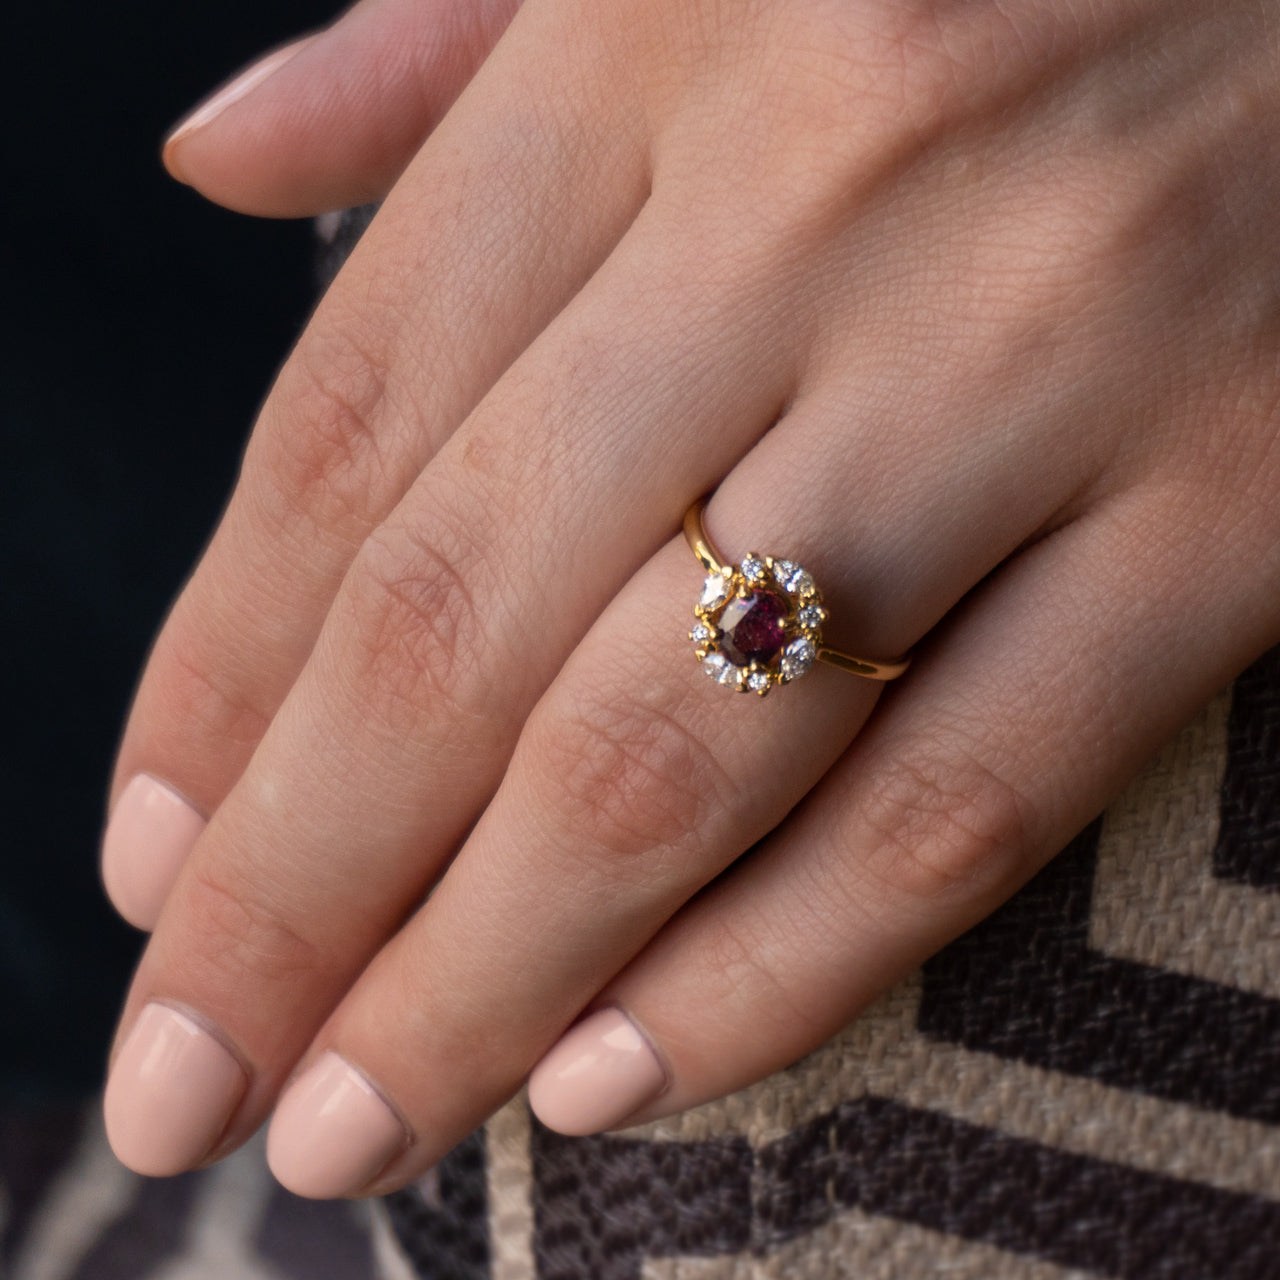 Woman's hand showcasing a 0.82ct ruby ring with diamond details and an 18k yellow gold band